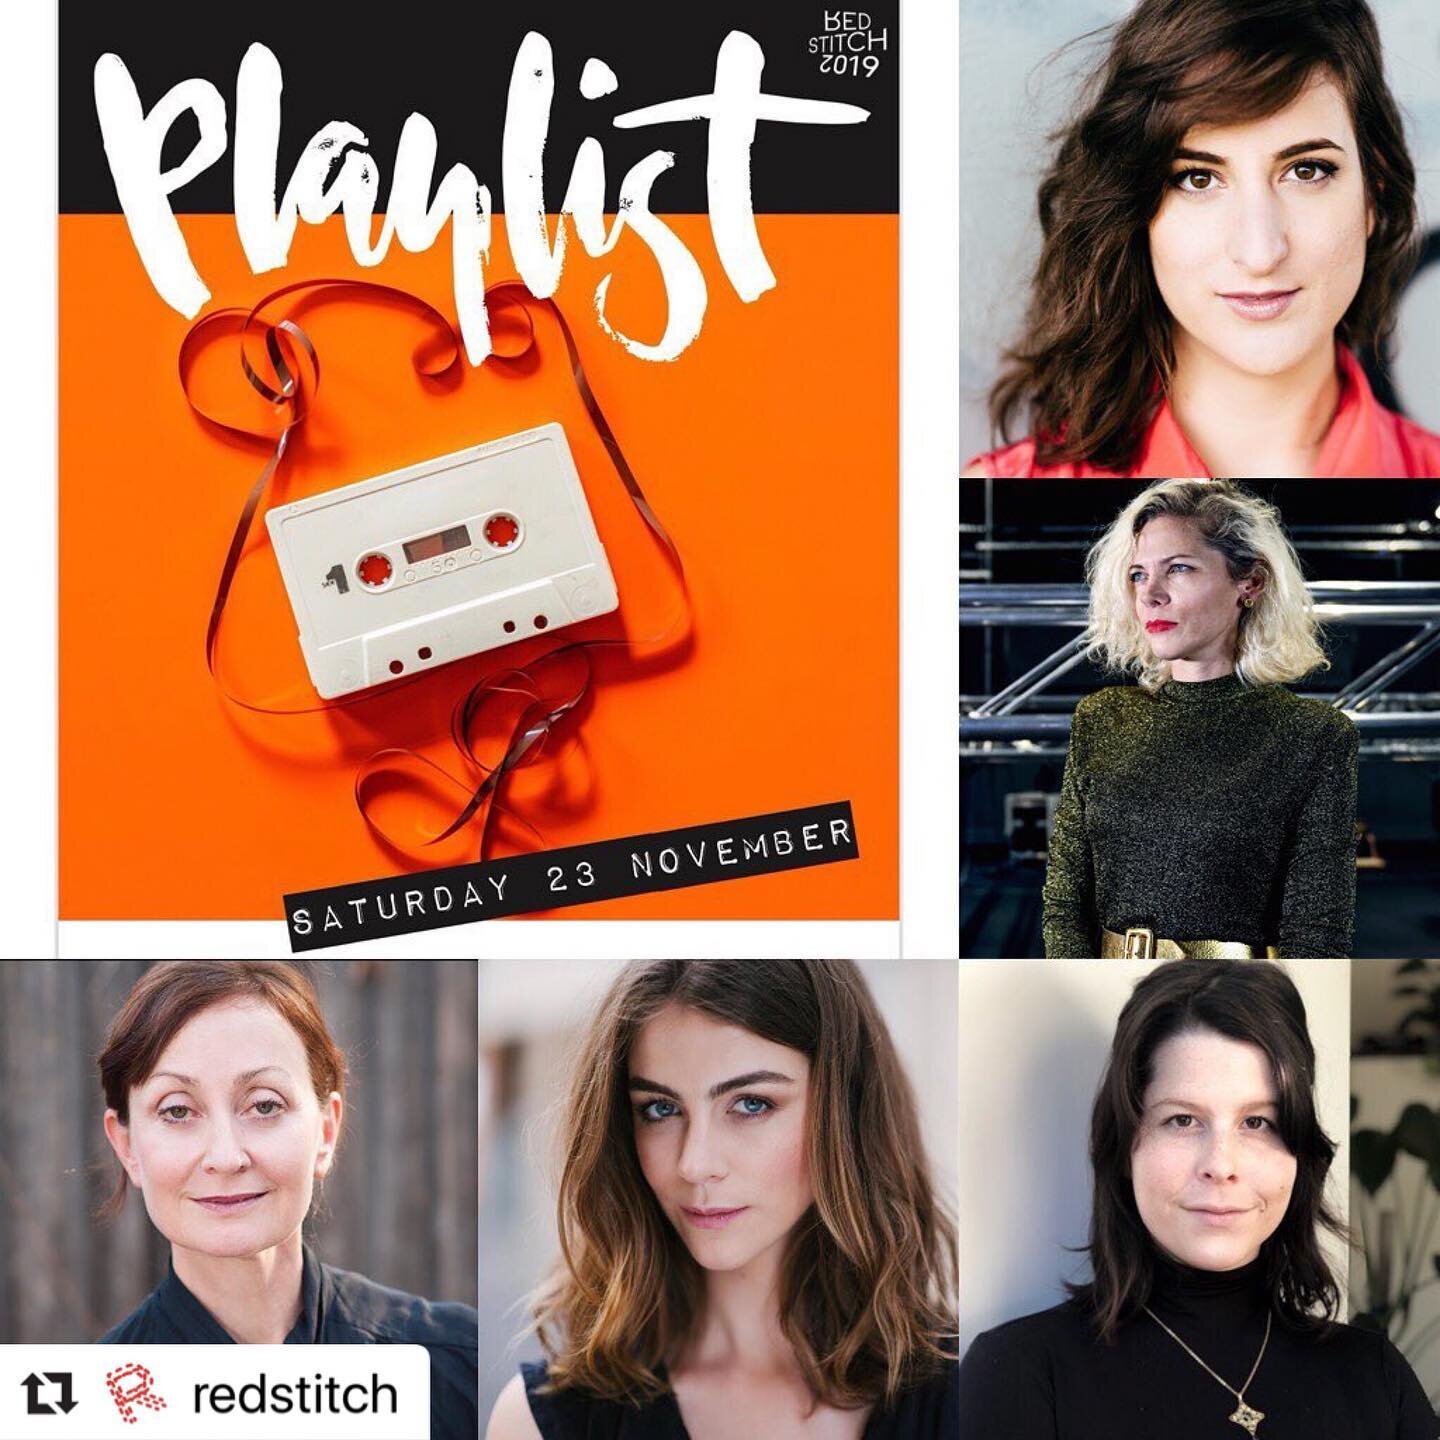 #Repost @redstitch with @make_repost
・・・
We're thrilled to announce our wonderful lineup of artists on board for PLAYlist 2019!

This playlet is called &lsquo;A Woman Returned&rsquo;. Written by Jamaica Zuanetti, this haunting little piece is directe